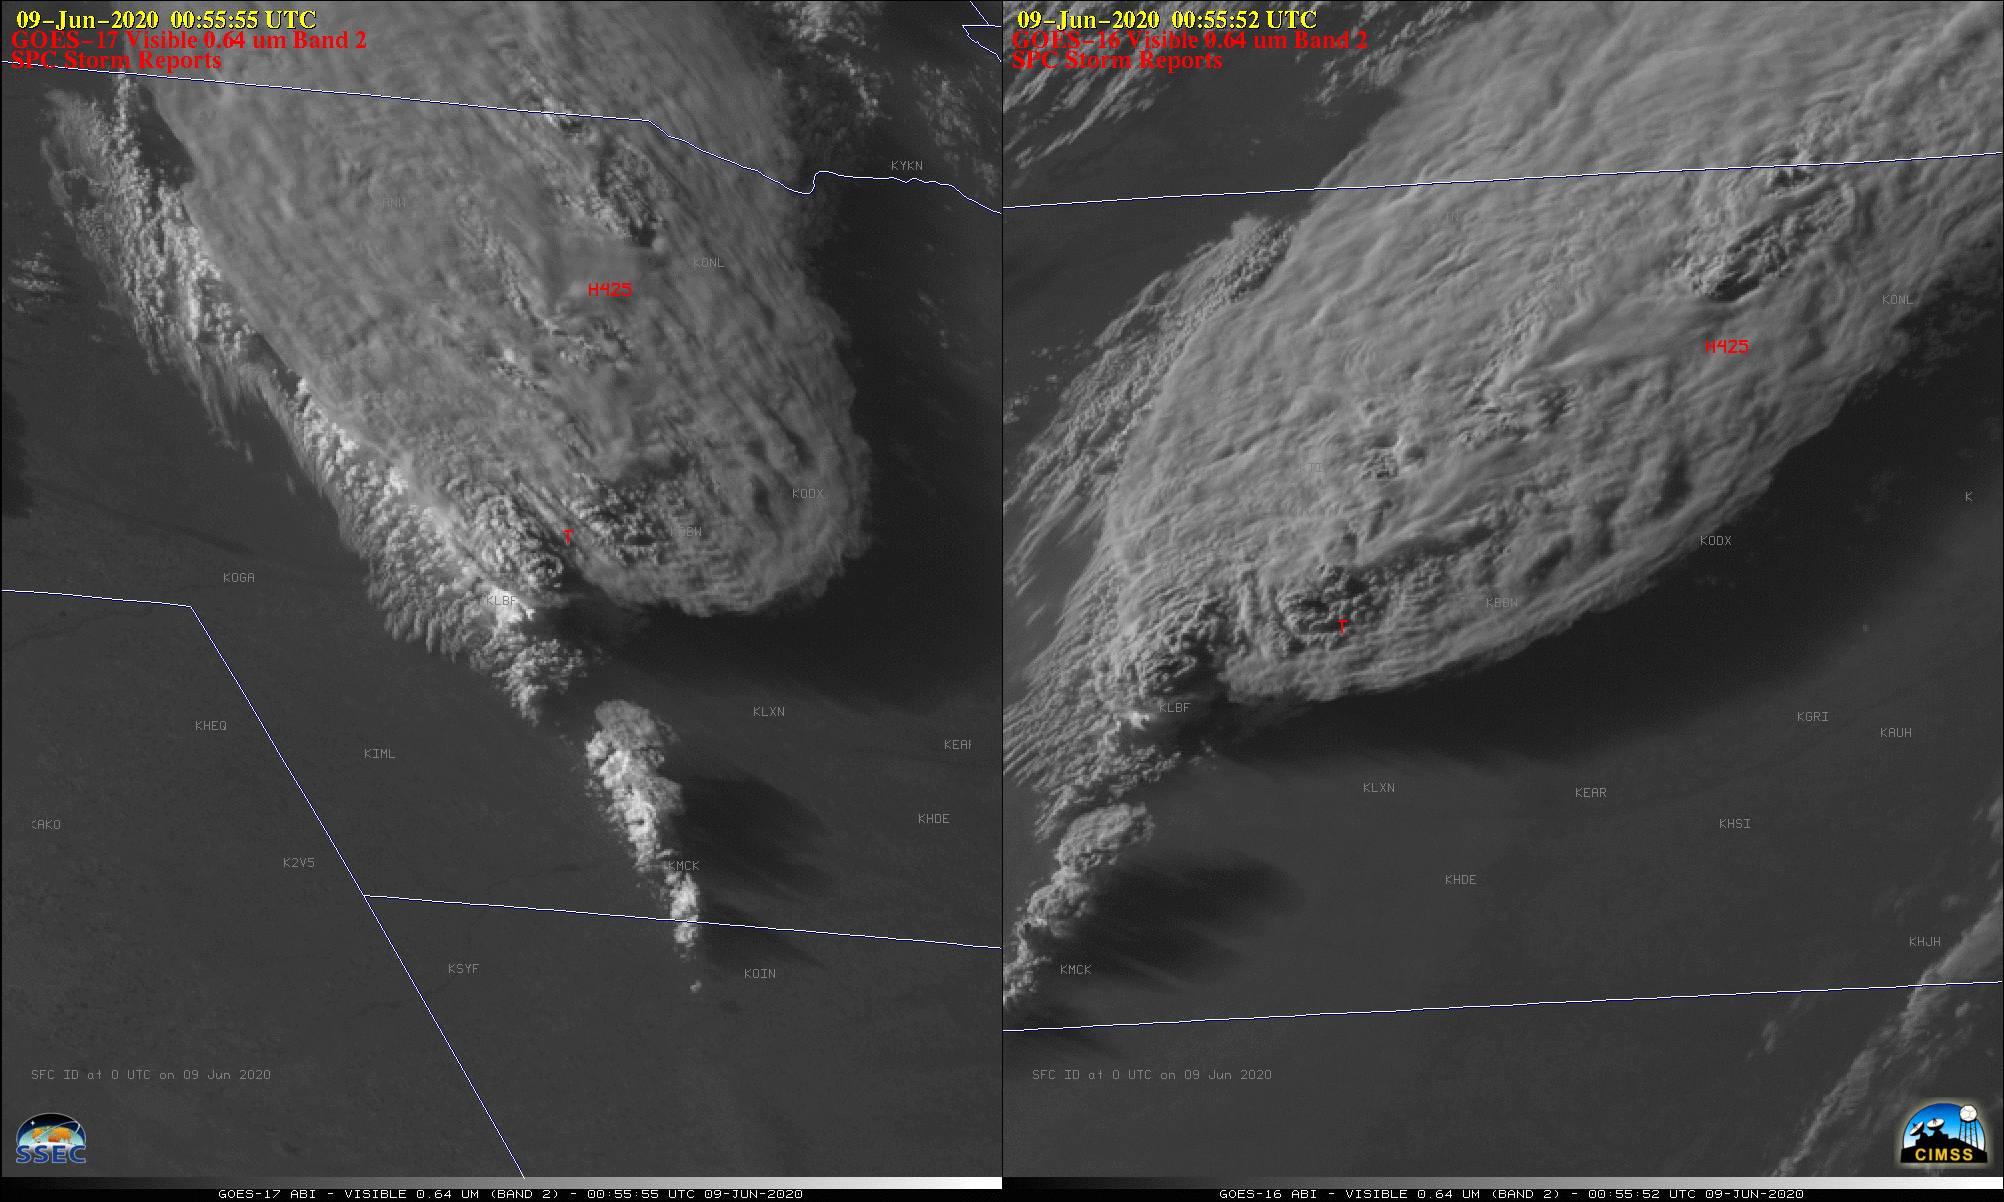 "Red" Visible (0.64 µm) images from GOES-17 (left) and GOES-16 (right) [click to play animation | MP4]